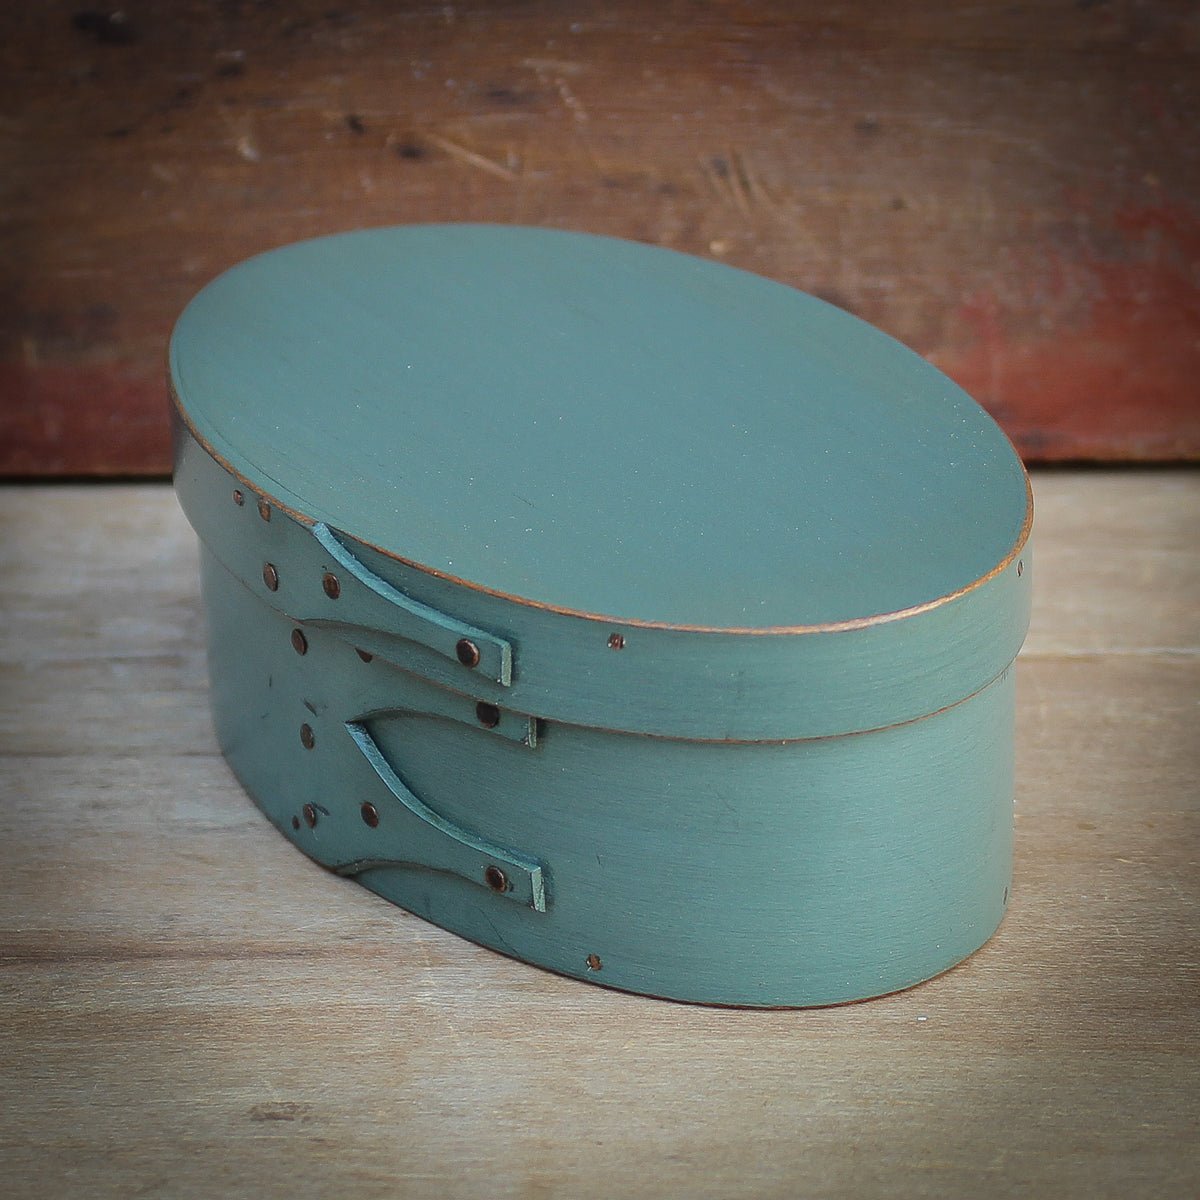 Shaker Oval Box, Size #0, LeHays Shaker Boxes, Handcrafted in Maine.  Sea Green Milk Paint Finish, Side View